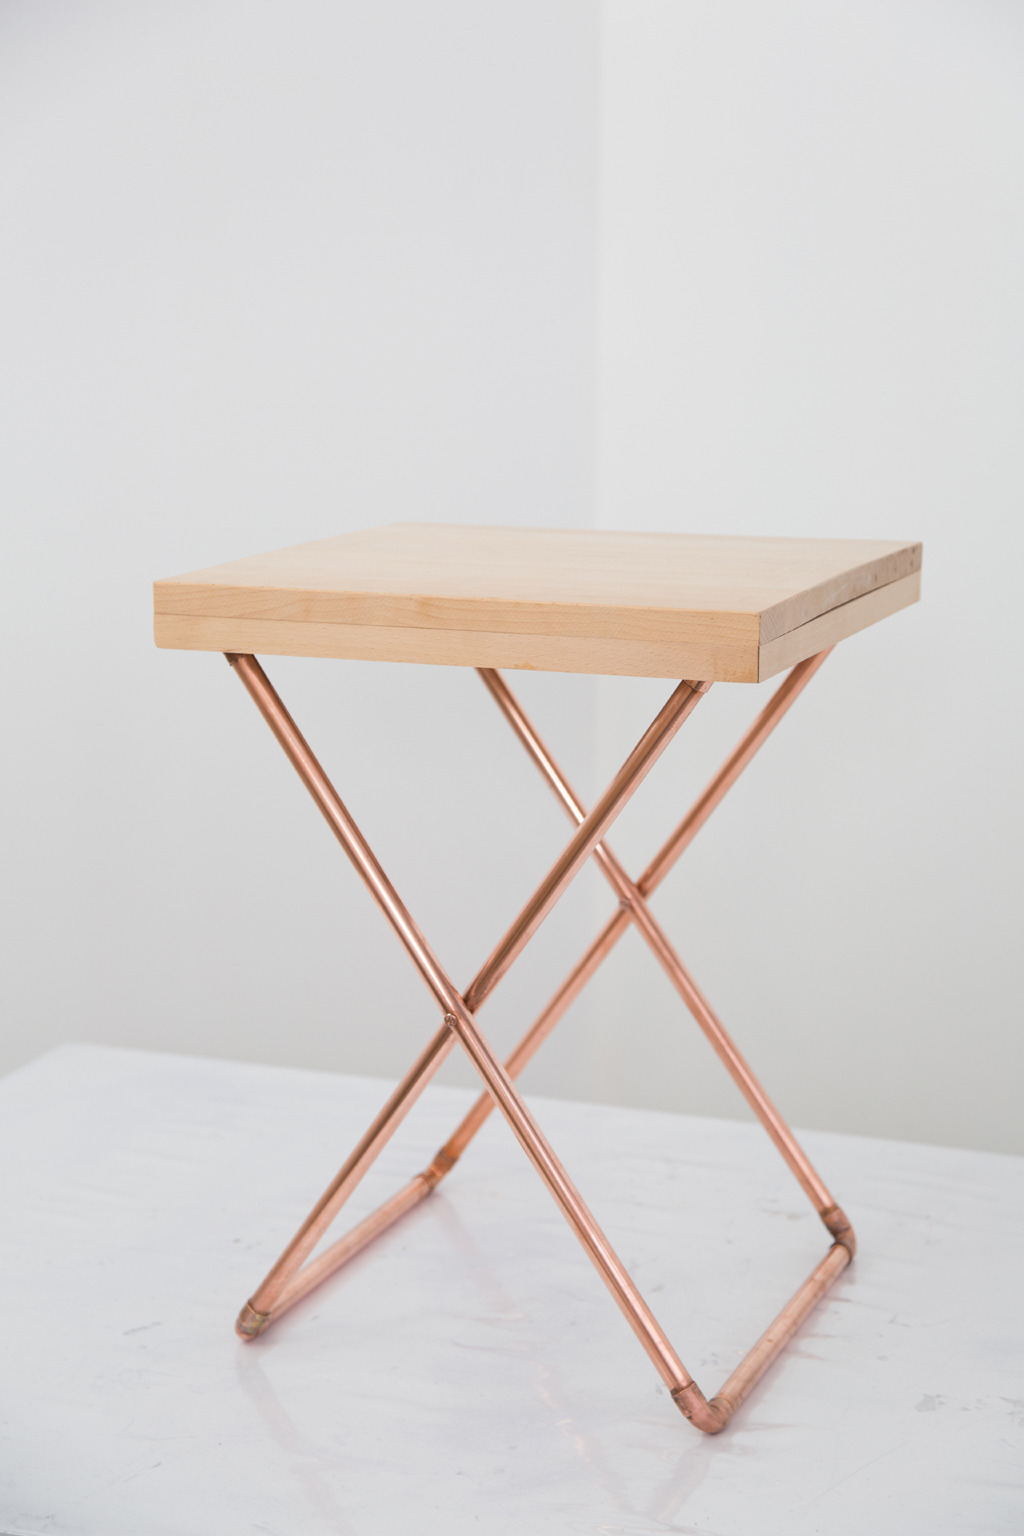 Creer une table d'appoint Cross